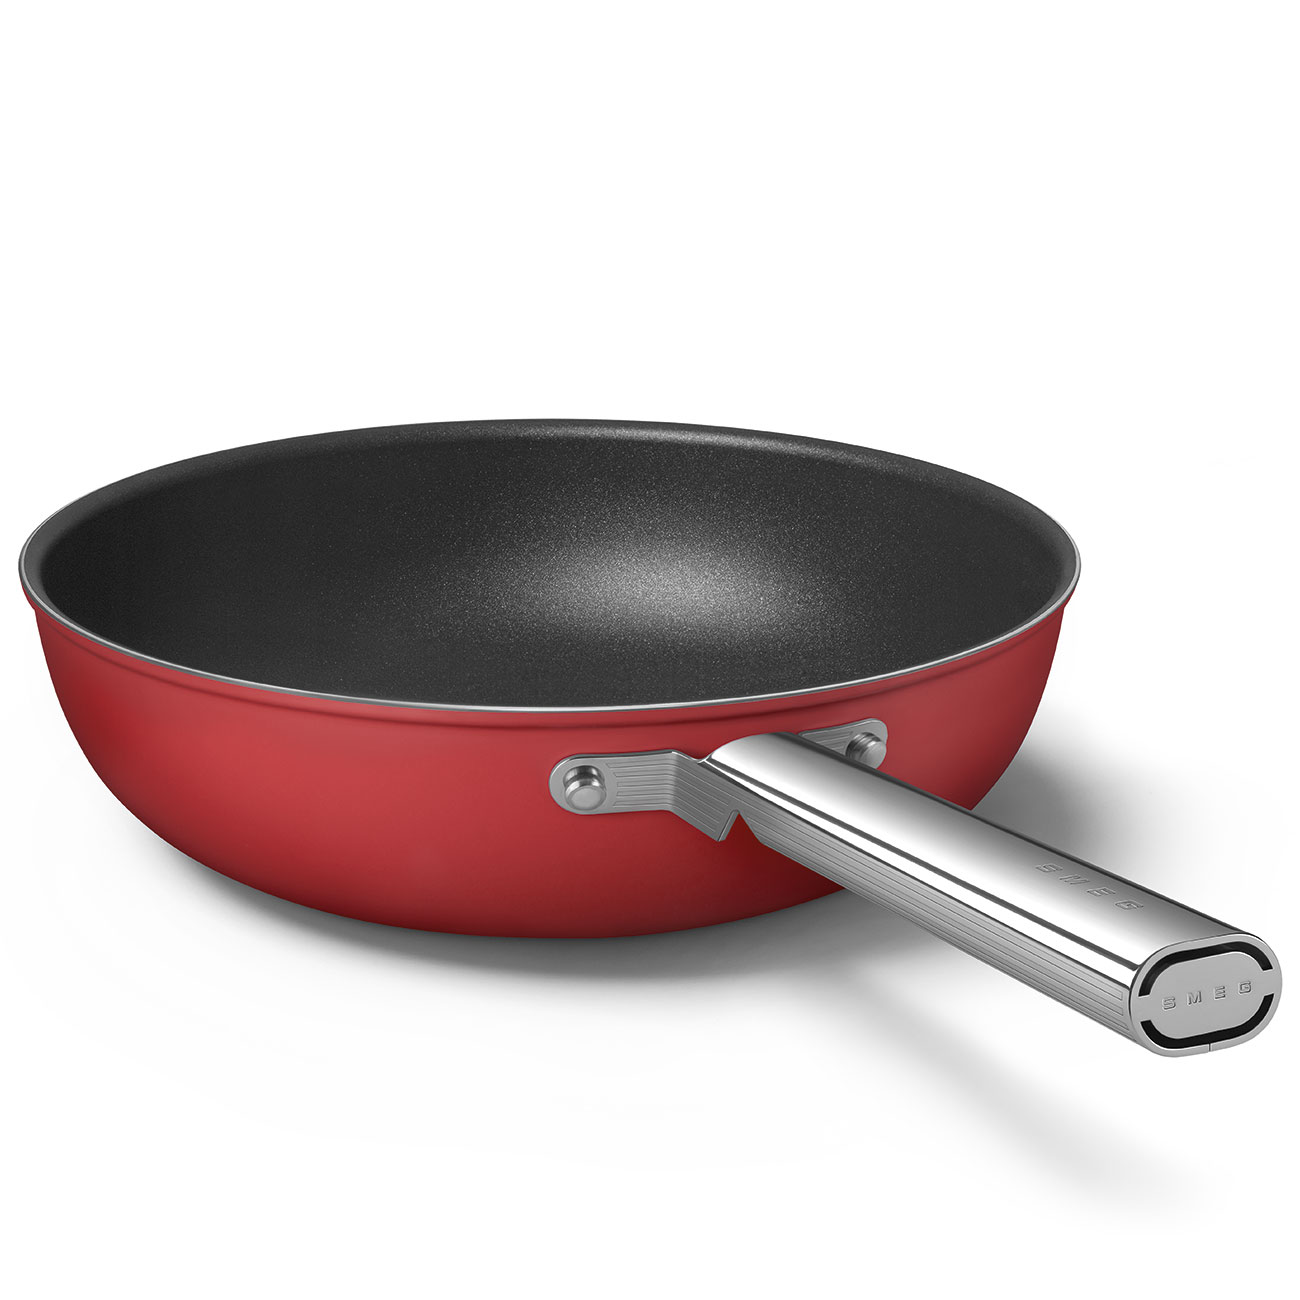 Smeg Red Non-stick Wok with Stainless Steel Handle - CKFW3001RDM_9